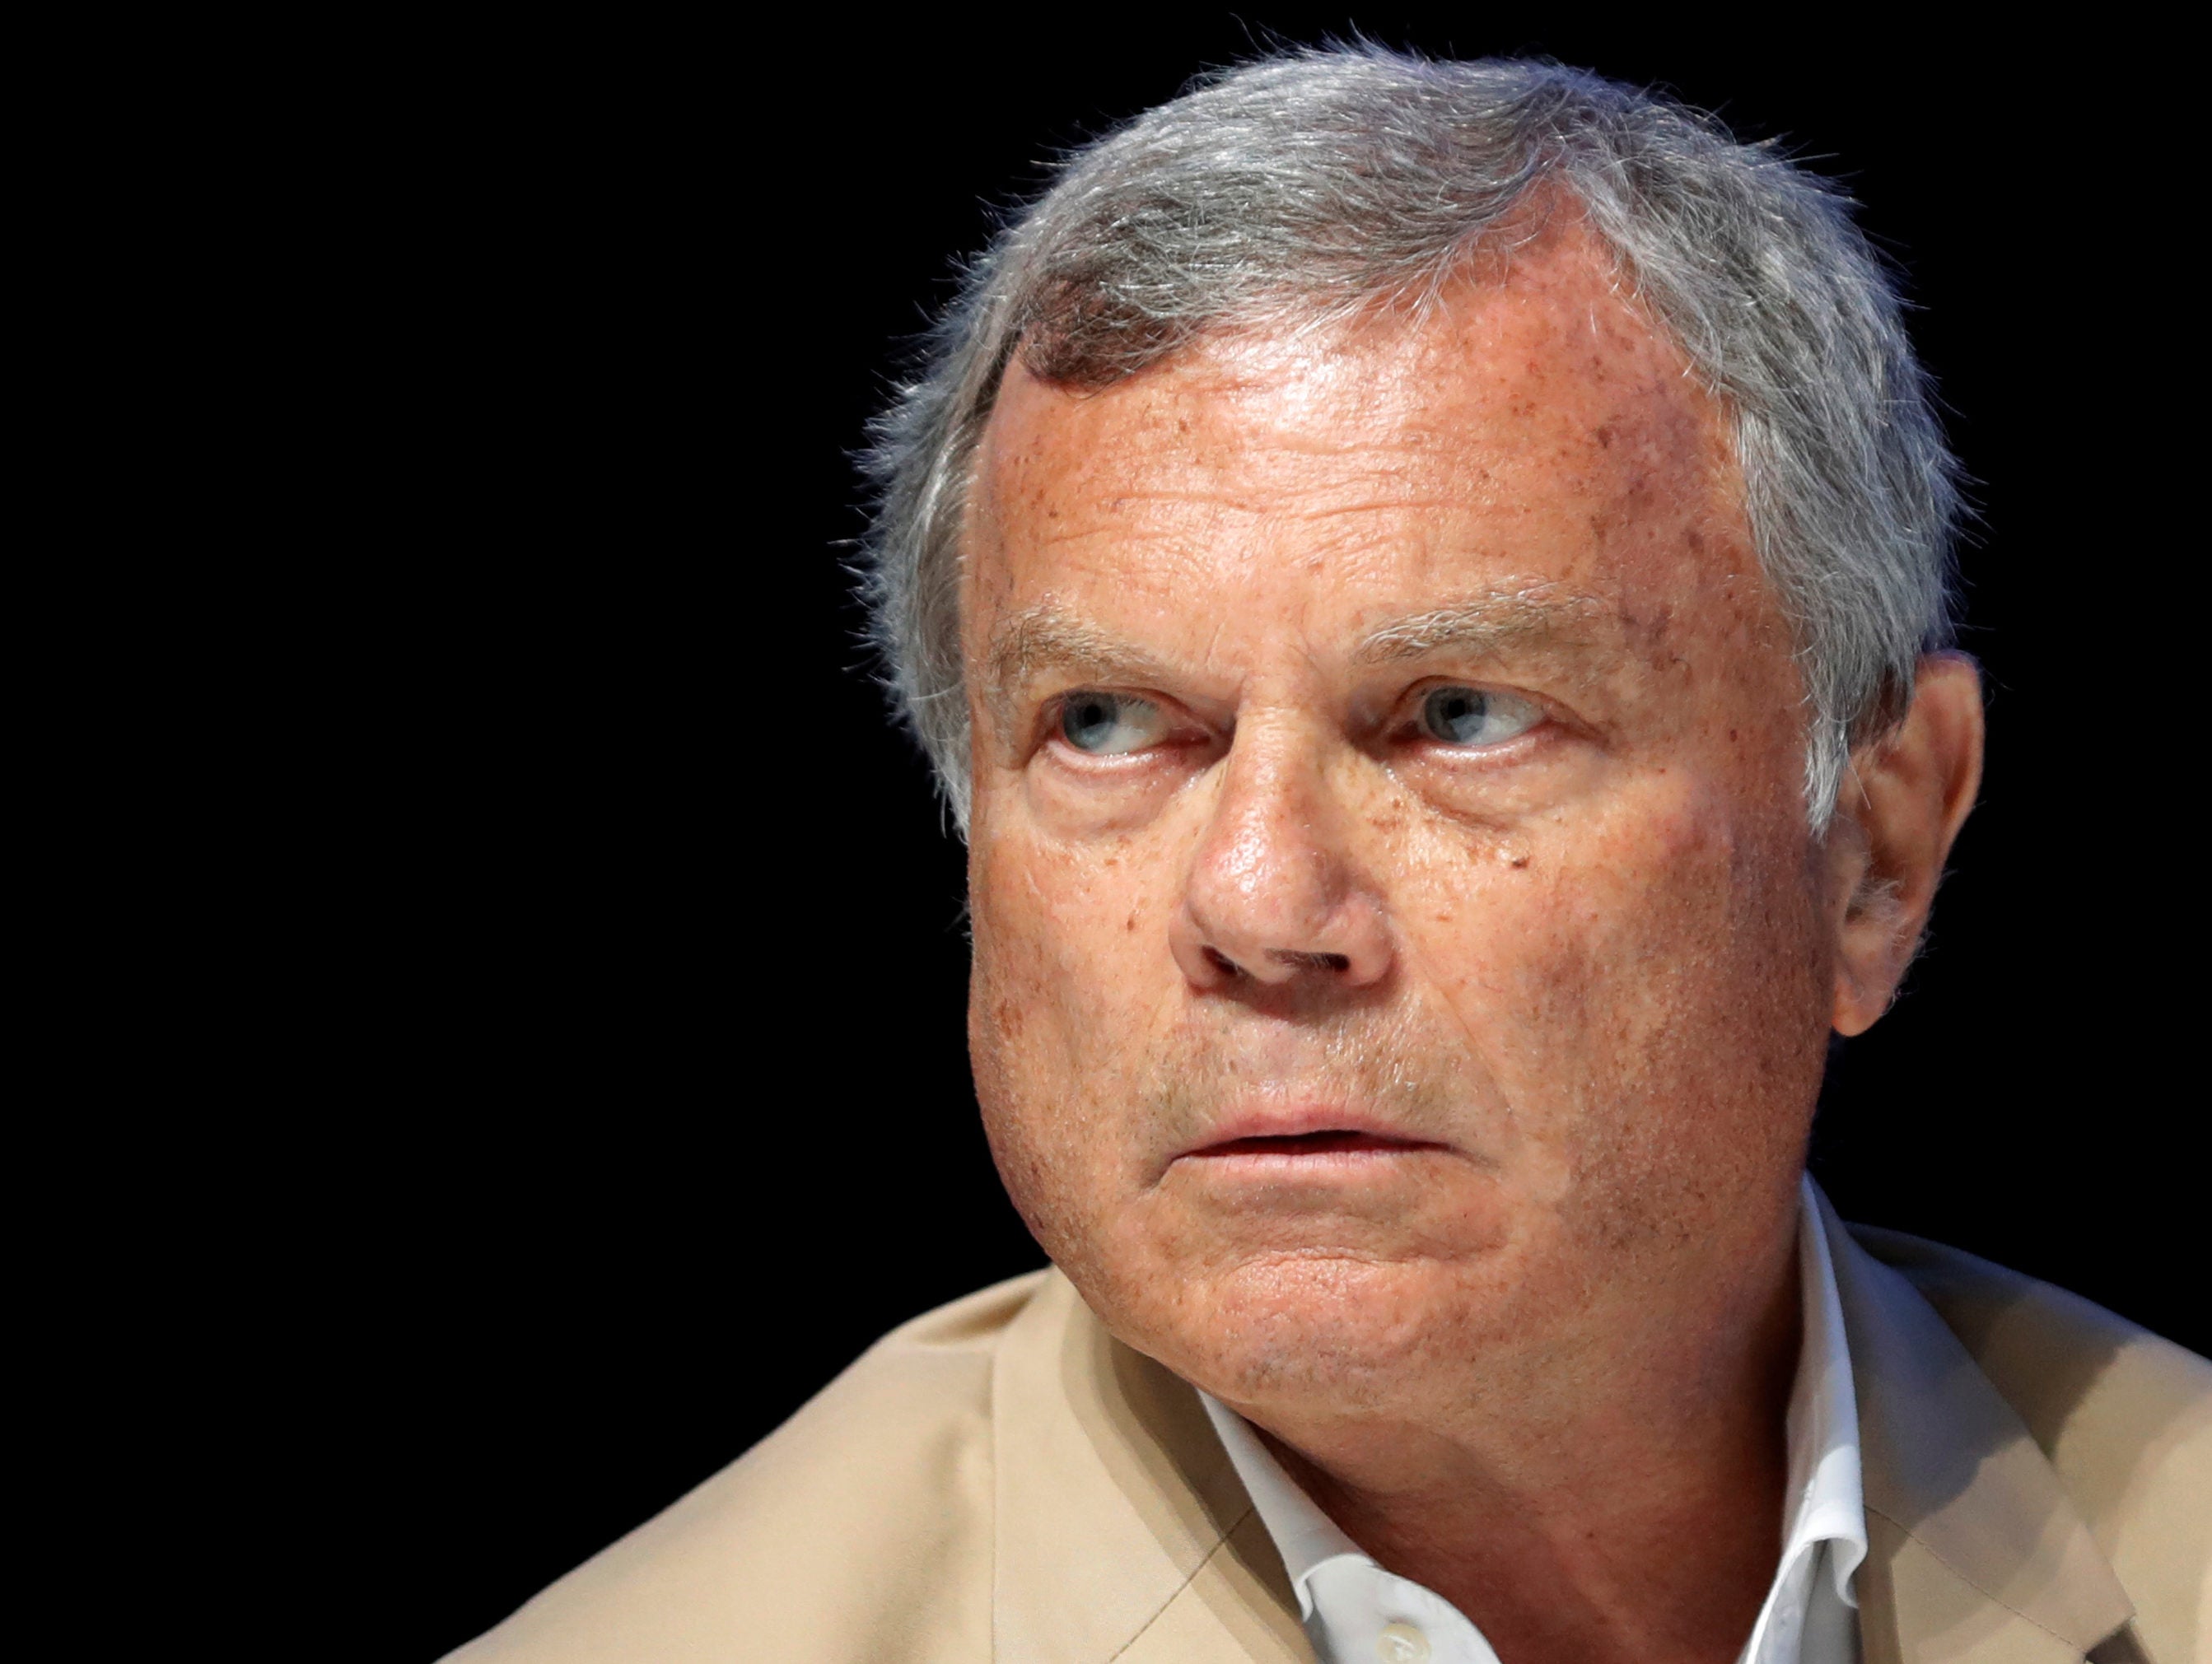 WPP to probe misconduct claim against chief executive Sir Martin Sorrel